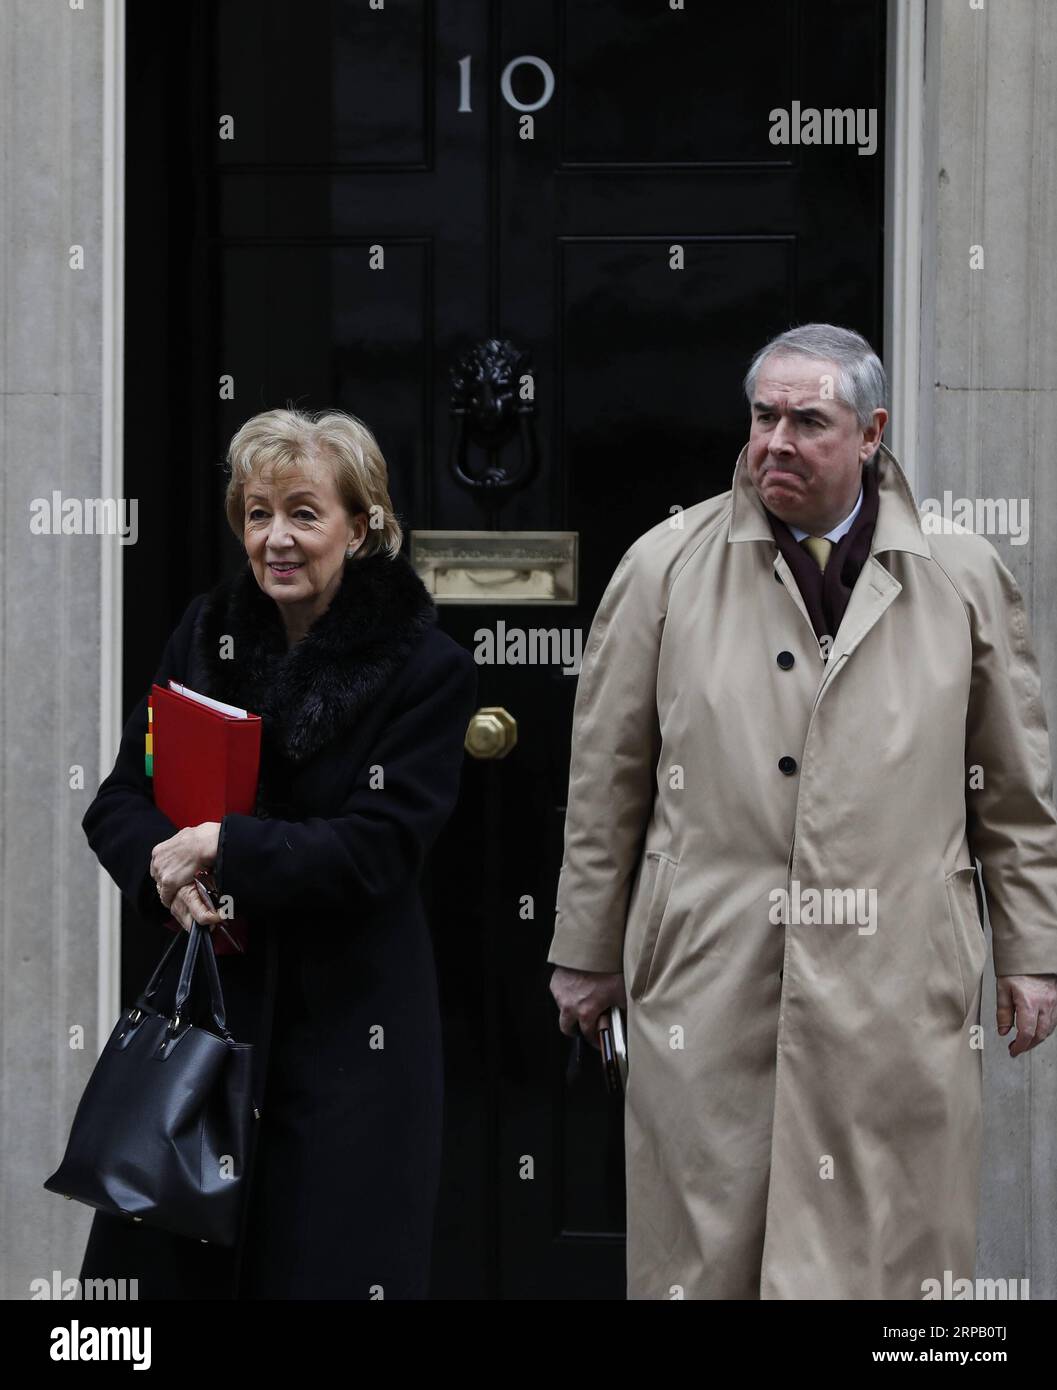 (190524) -- BEIJING, May 24, 2019 (Xinhua) -- File photo taken on Feb. 12, 2019 shows the British leader of the House of Commons Andrea Leadsom (L) leaving 10 Downing Street after a cabinet meeting in London, Britain. The British leader of the House of Commons Andrea Leadsom on May 22 resigned amid growing discontent with the prime minster s leadership, one day after the new Brexit agreement backfired. (Xinhua/Han Yan) XINHUA PHOTOS OF THE DAY PUBLICATIONxNOTxINxCHN Stock Photo